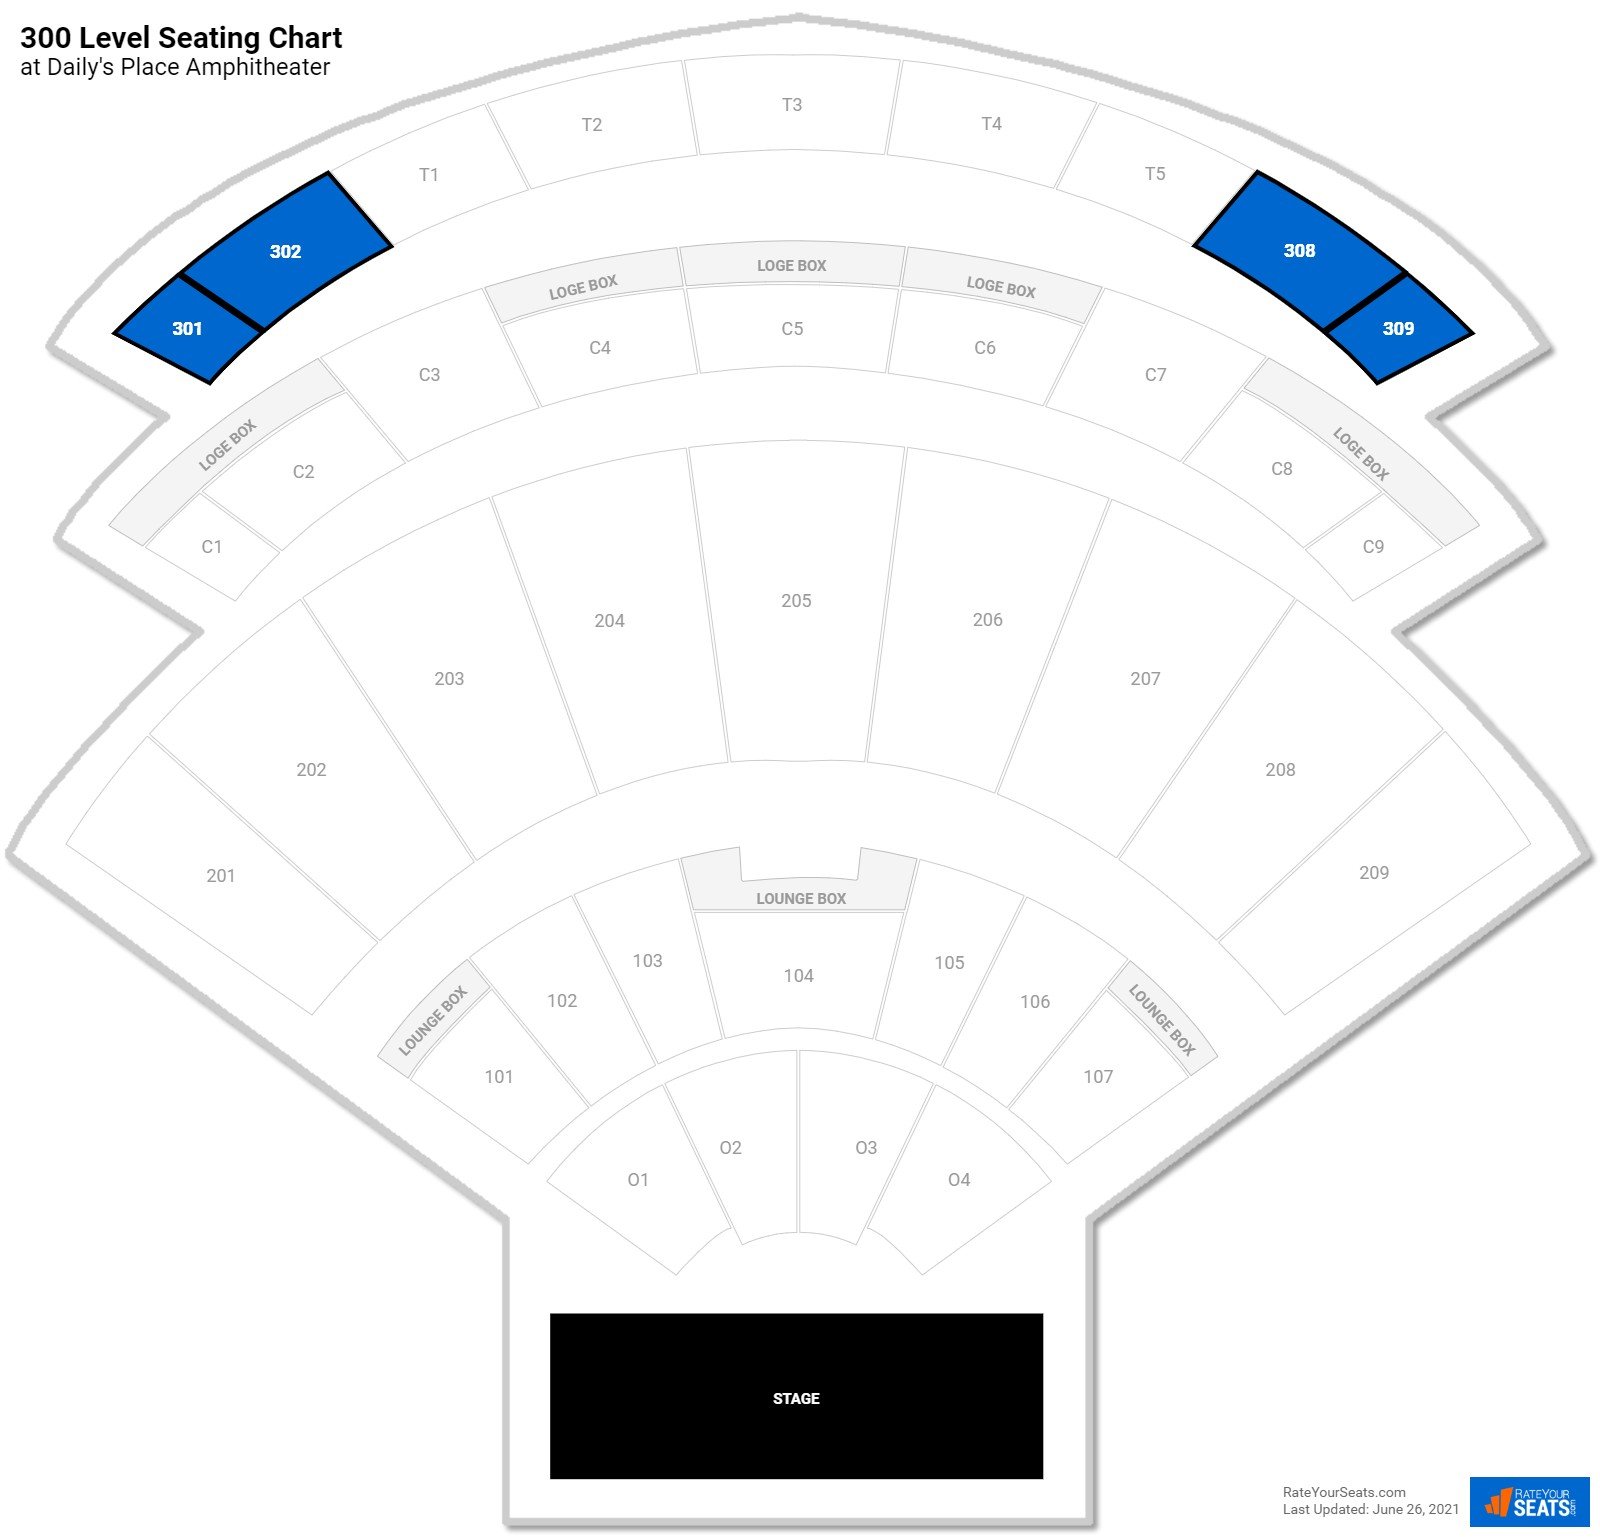 Concert 300 Level Seating Chart at Daily